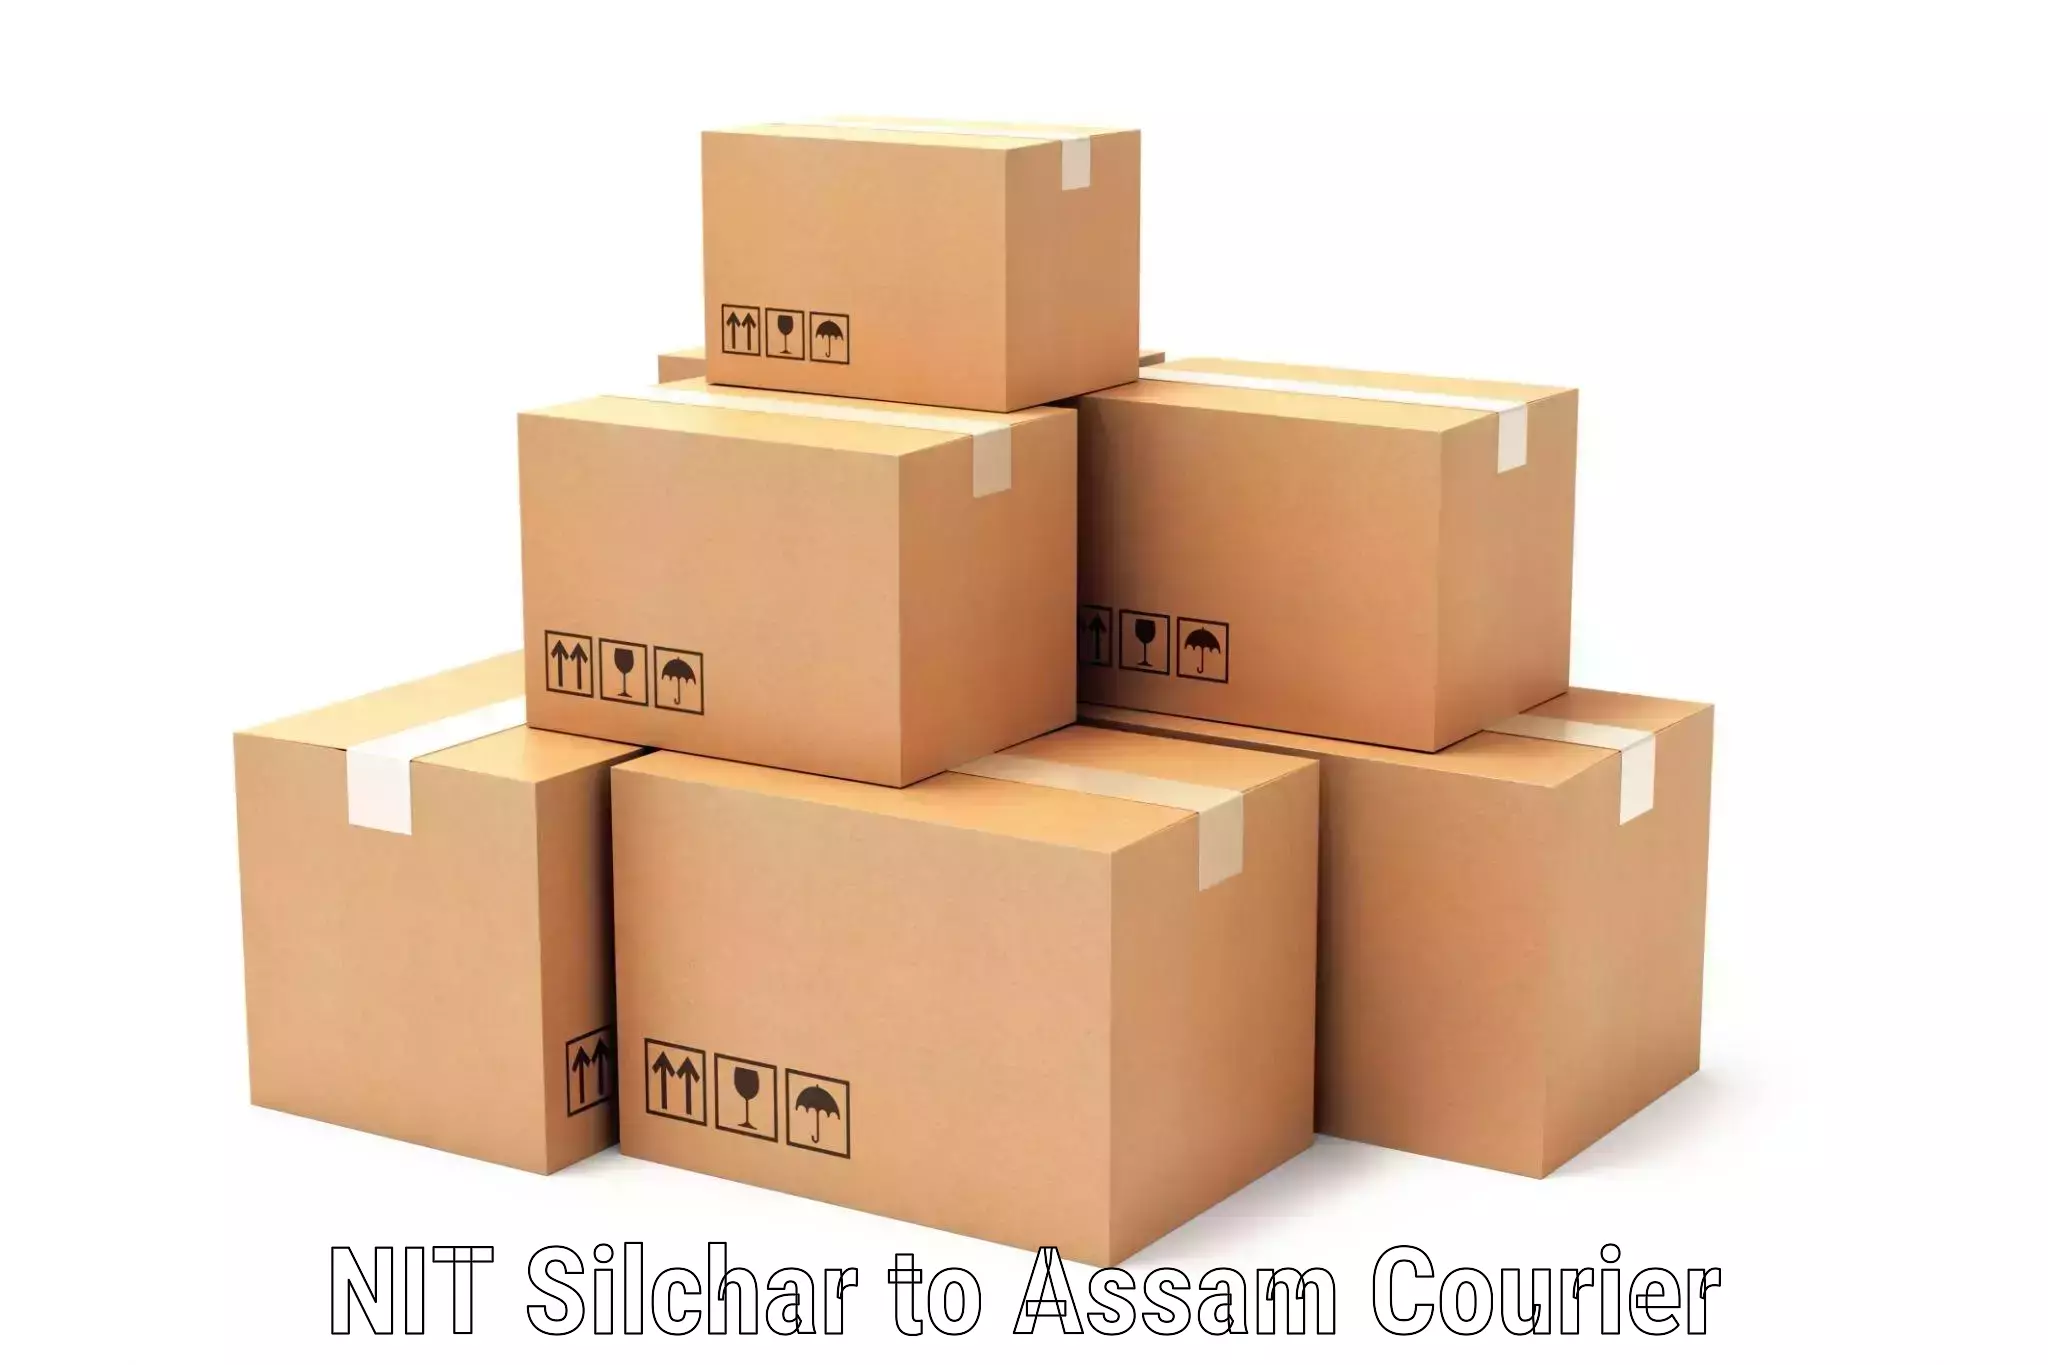 Customer-centric shipping in NIT Silchar to Karbi Anglong